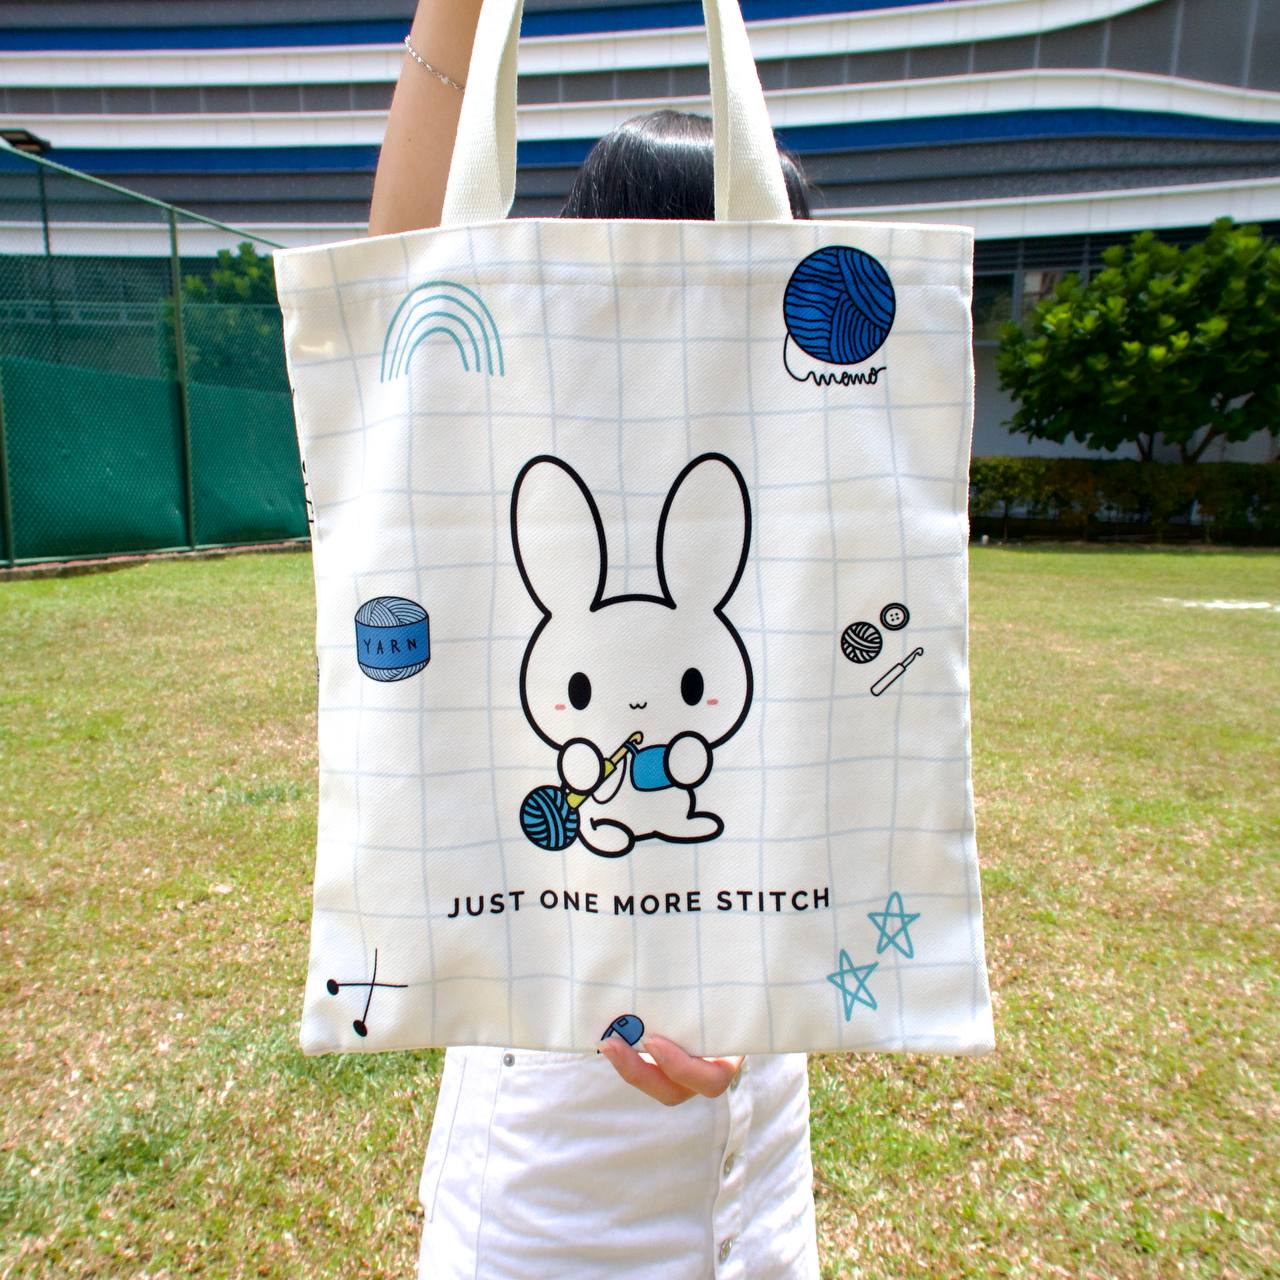 Just Another Stitch Tote Bag